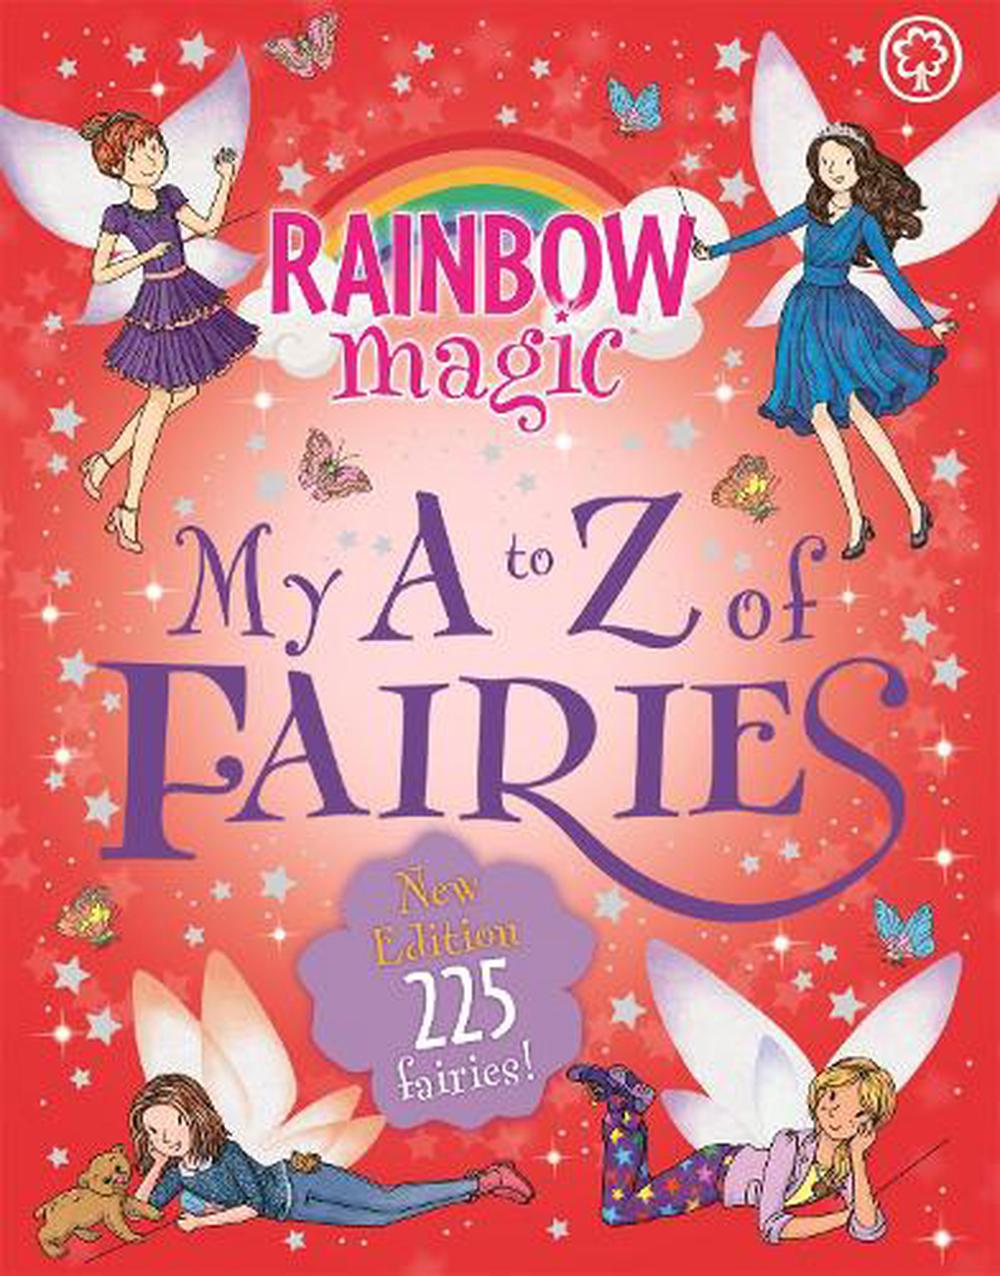 Pixie Magic: Pippin and the Birthday Bake: Book 3 by Daisy Meadows - Books  - Hachette Australia